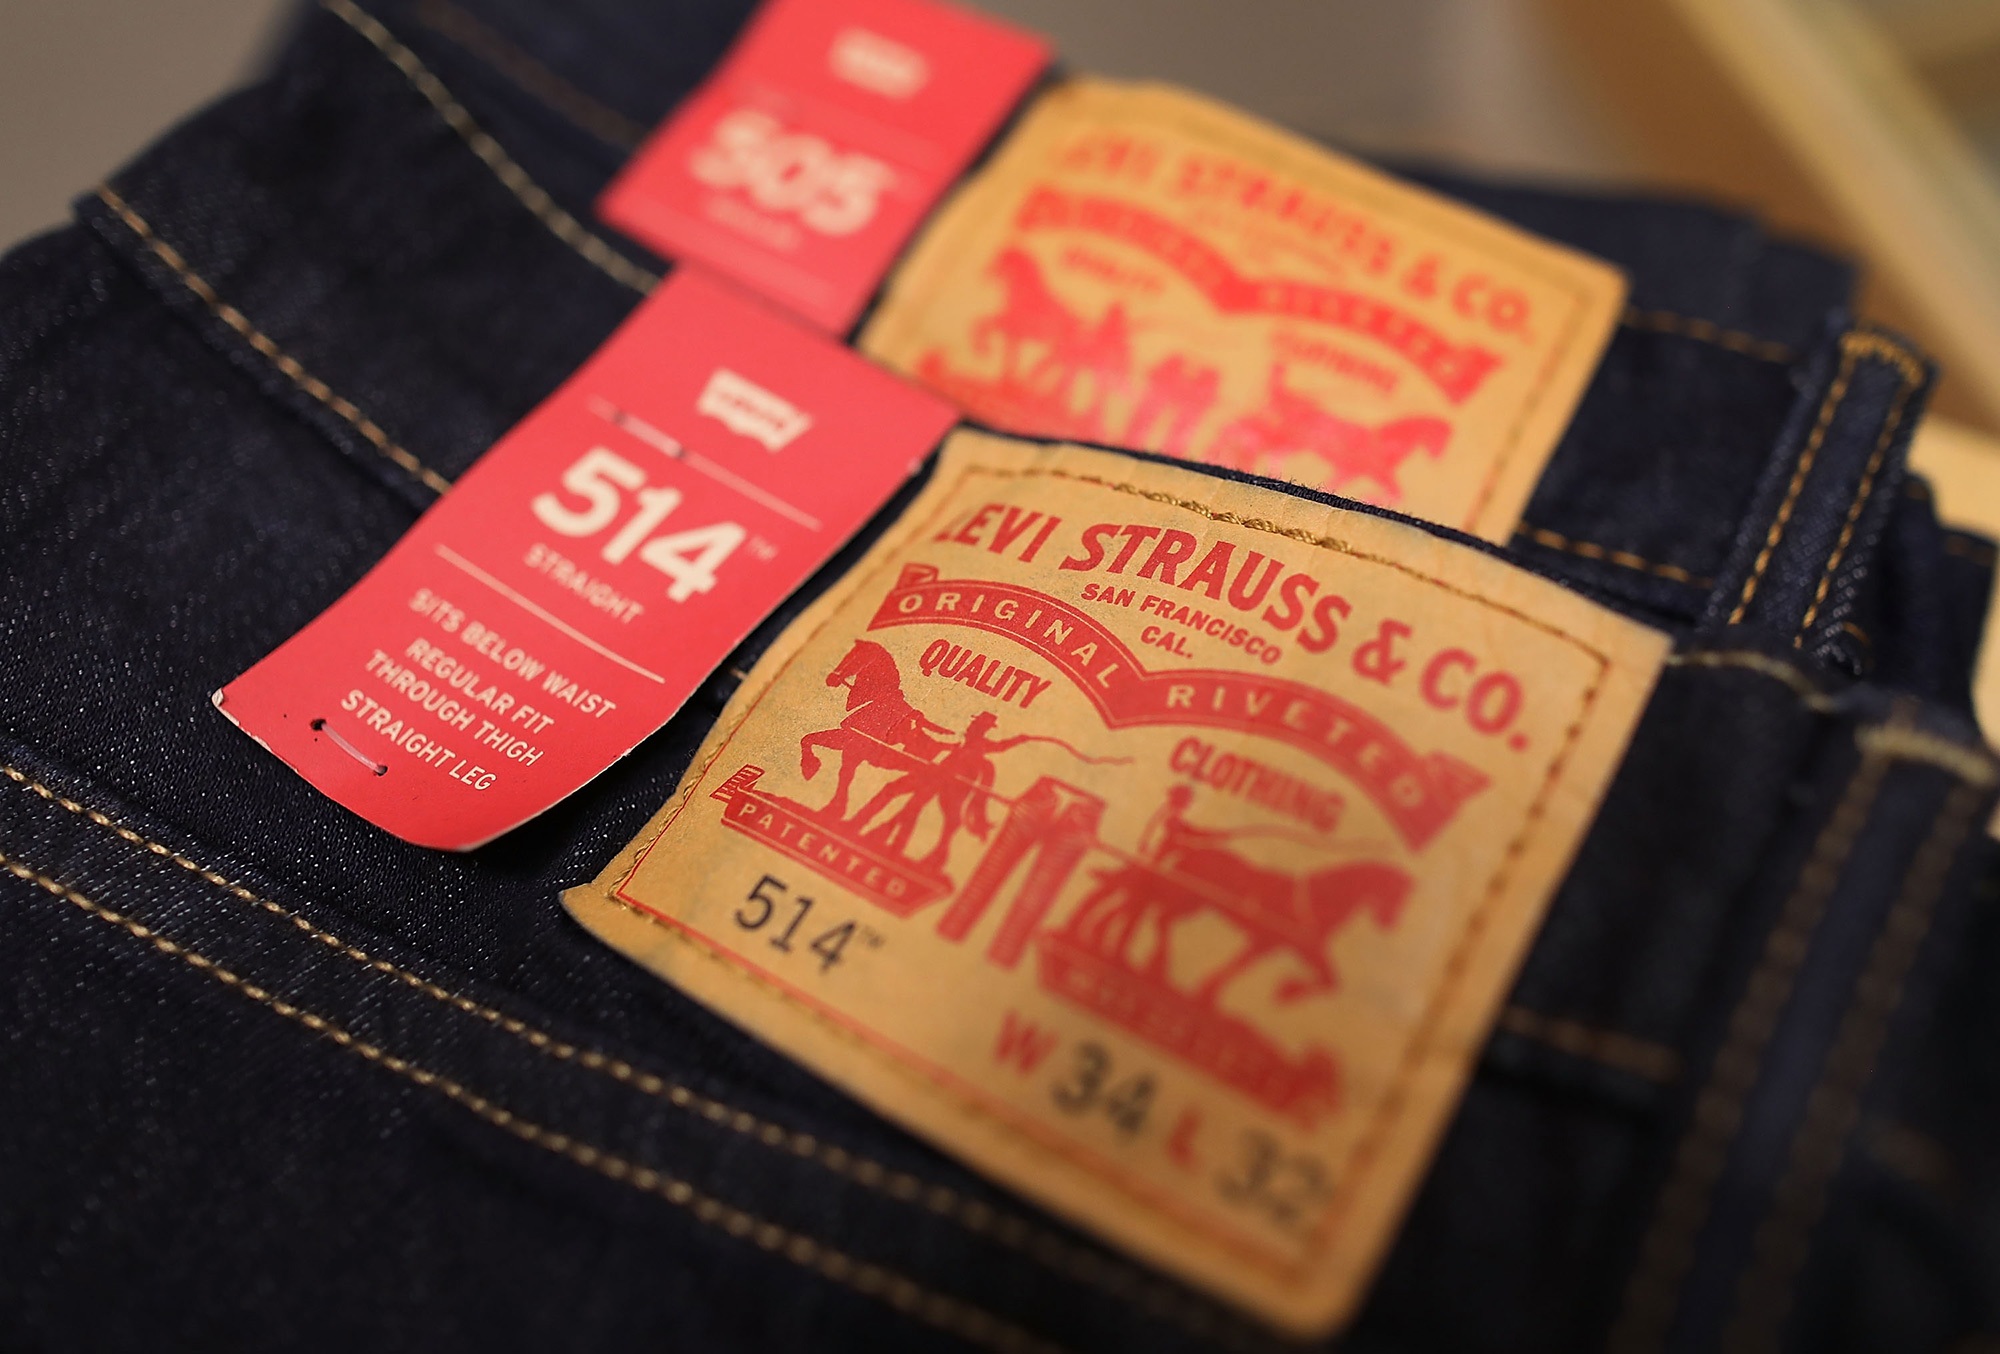 Levi Strauss Seeks to Raise Up to $800 